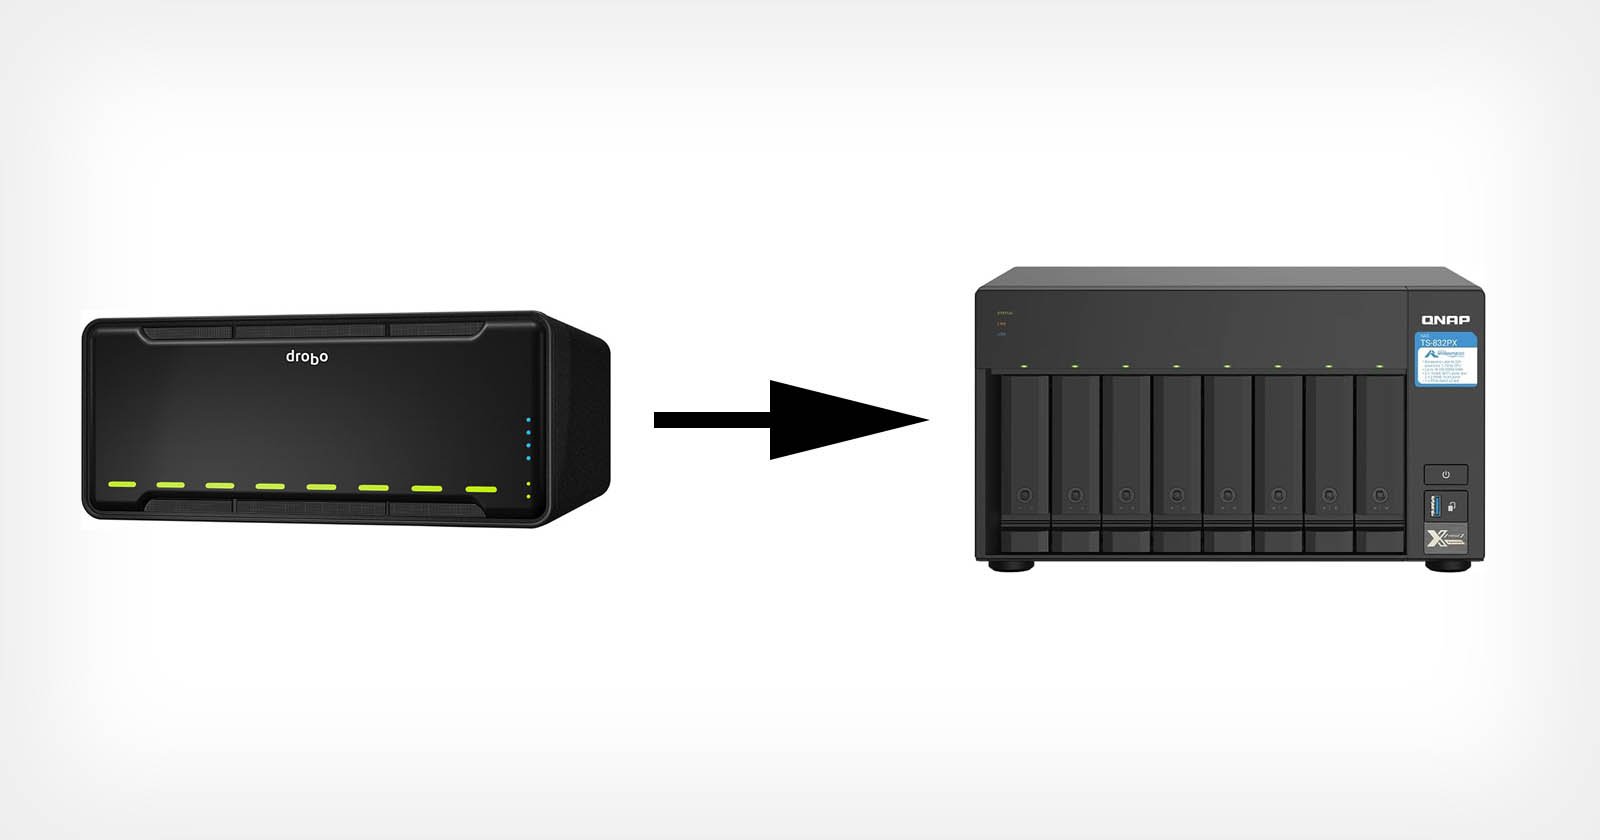 Moving 1.5 Million Photos from an Old Drobo to a New QNAP NAS